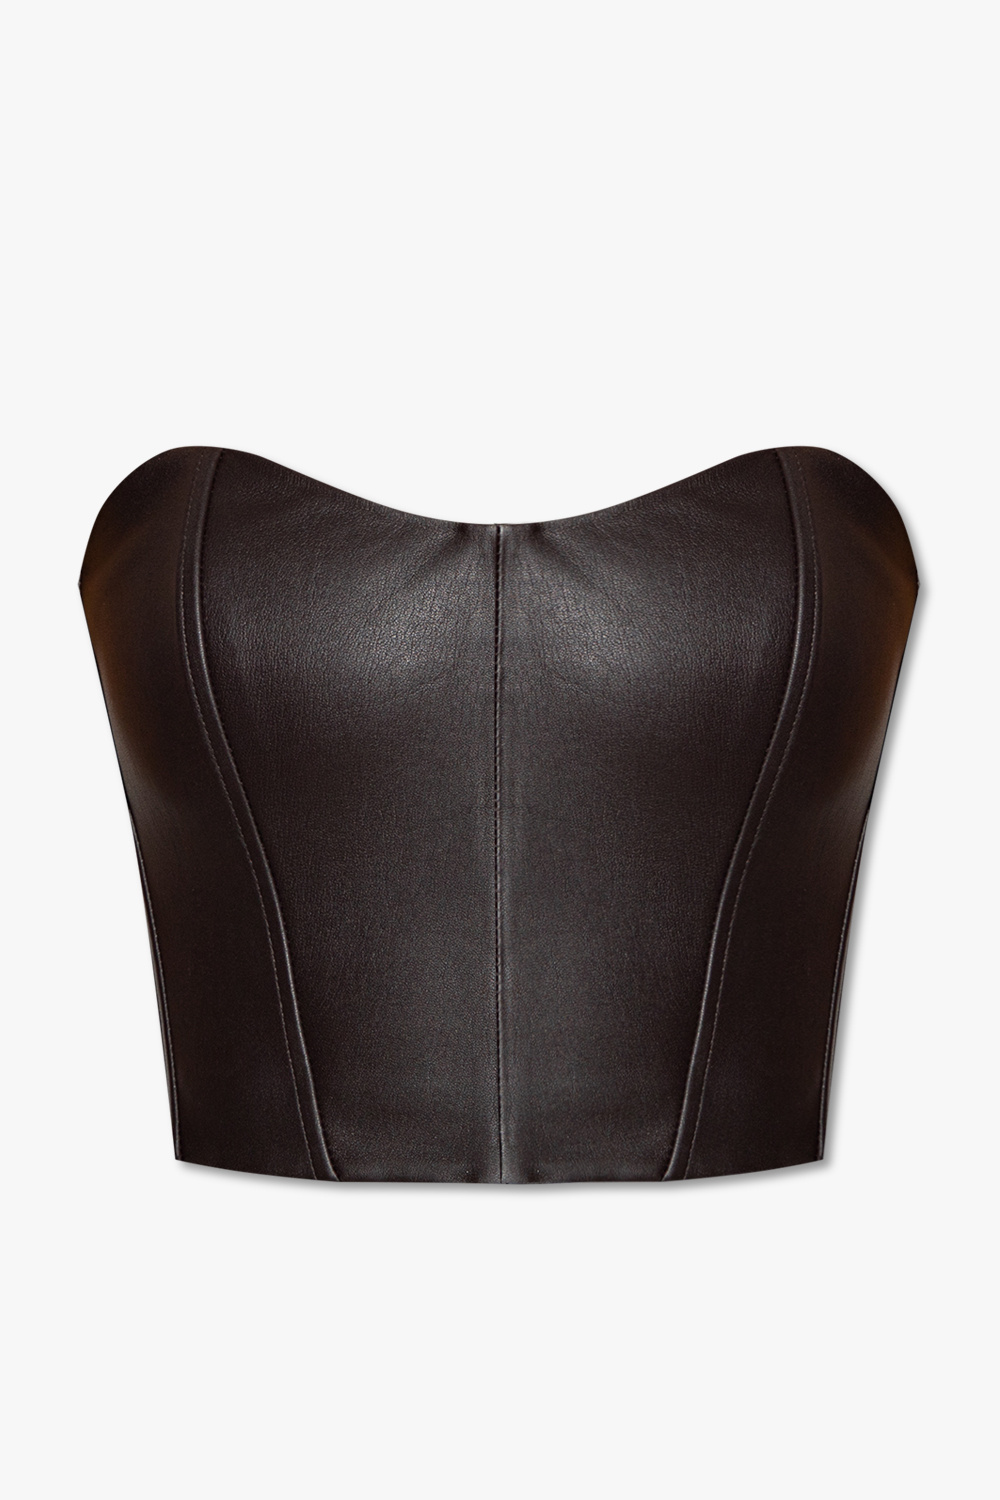 The Mannei ‘Oviedo’ leather top